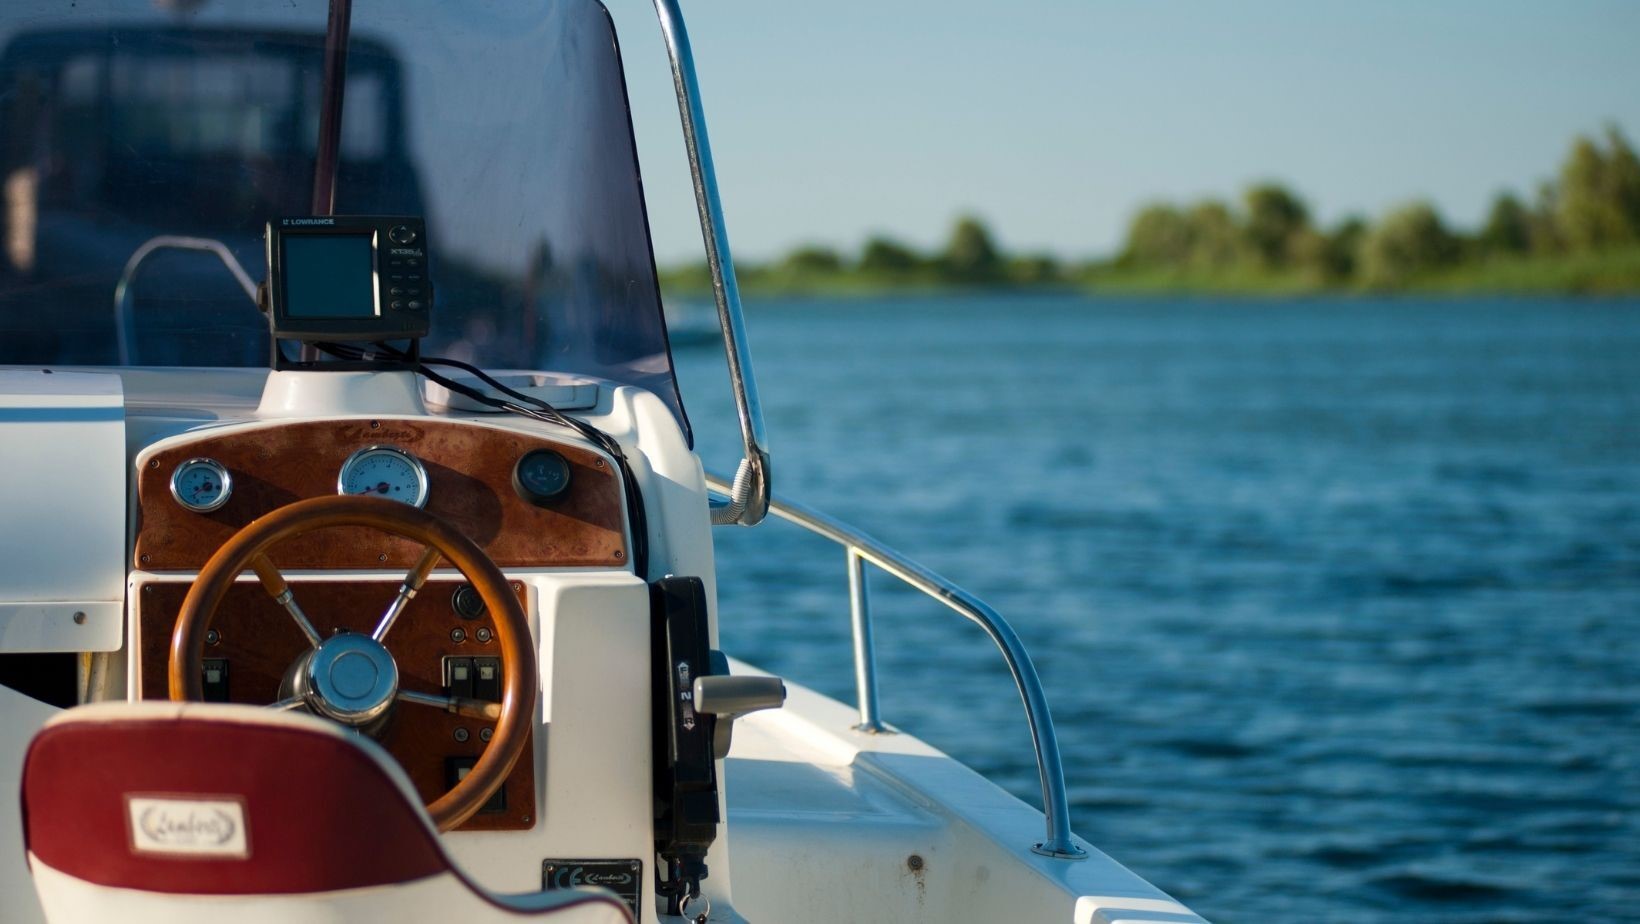 MD Marine Insurance - The Benefits of Having Reliable Boat Insurance